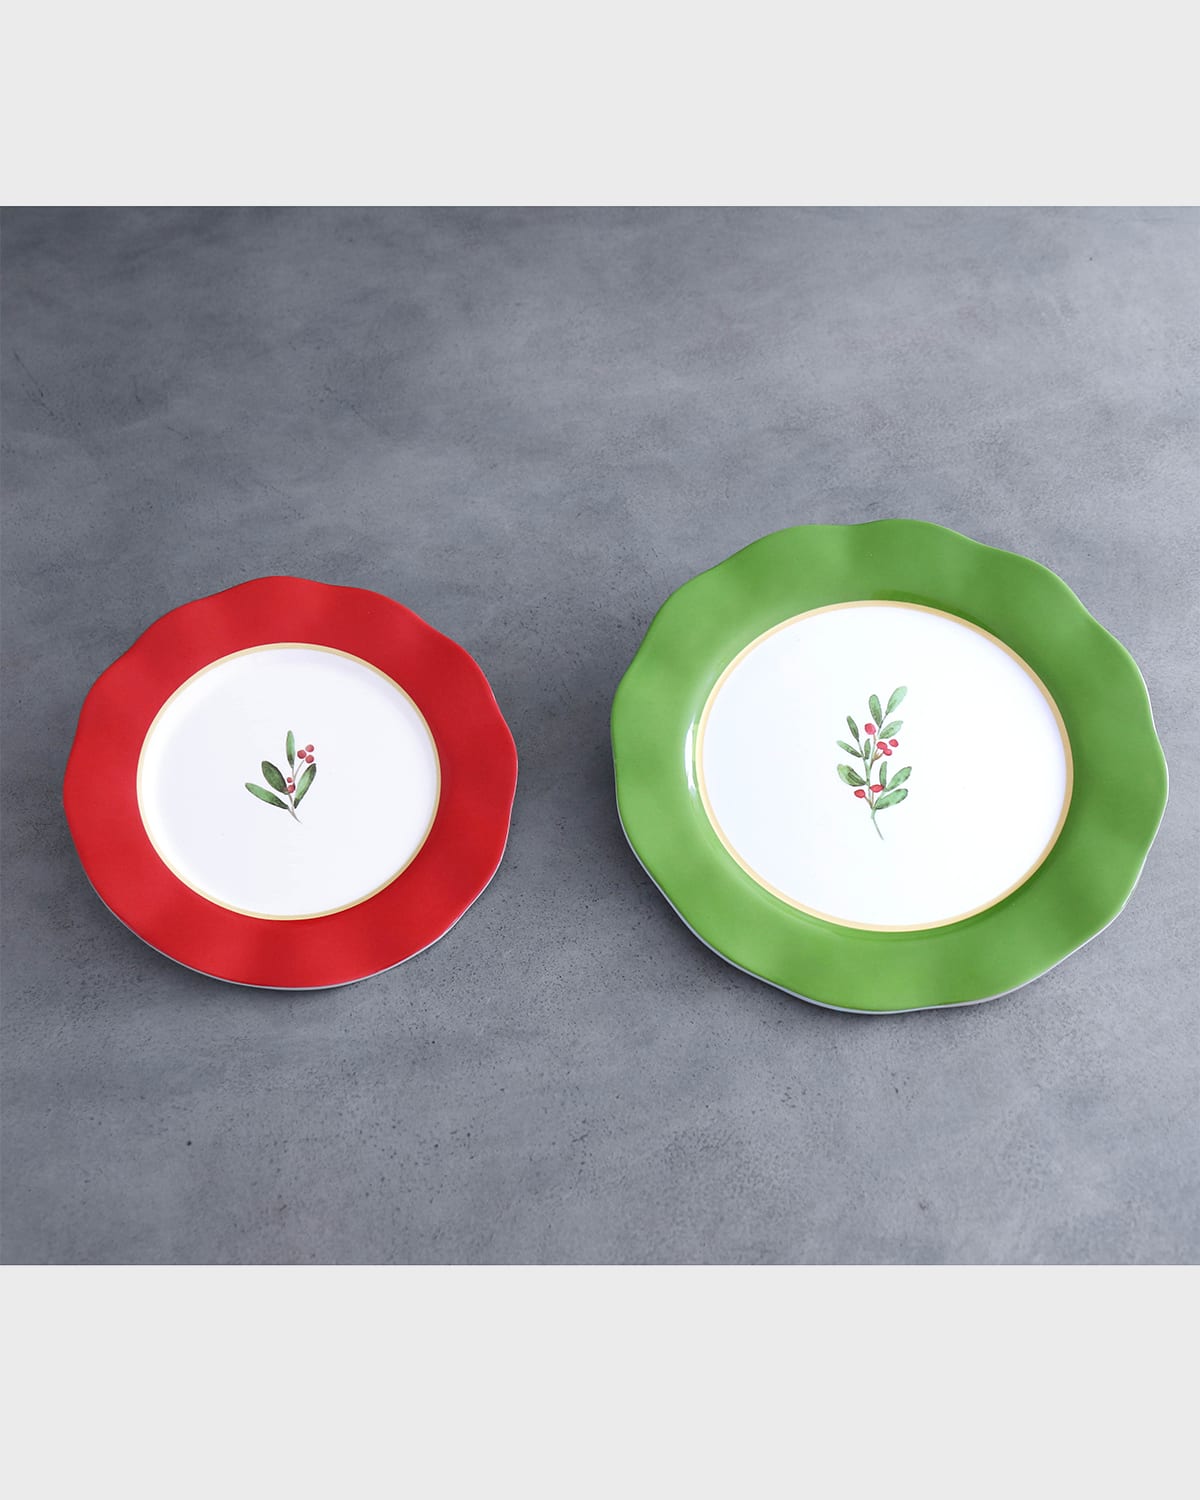 VIDA Holly 11" Dinner Plates, Set of 4 (Green and White)